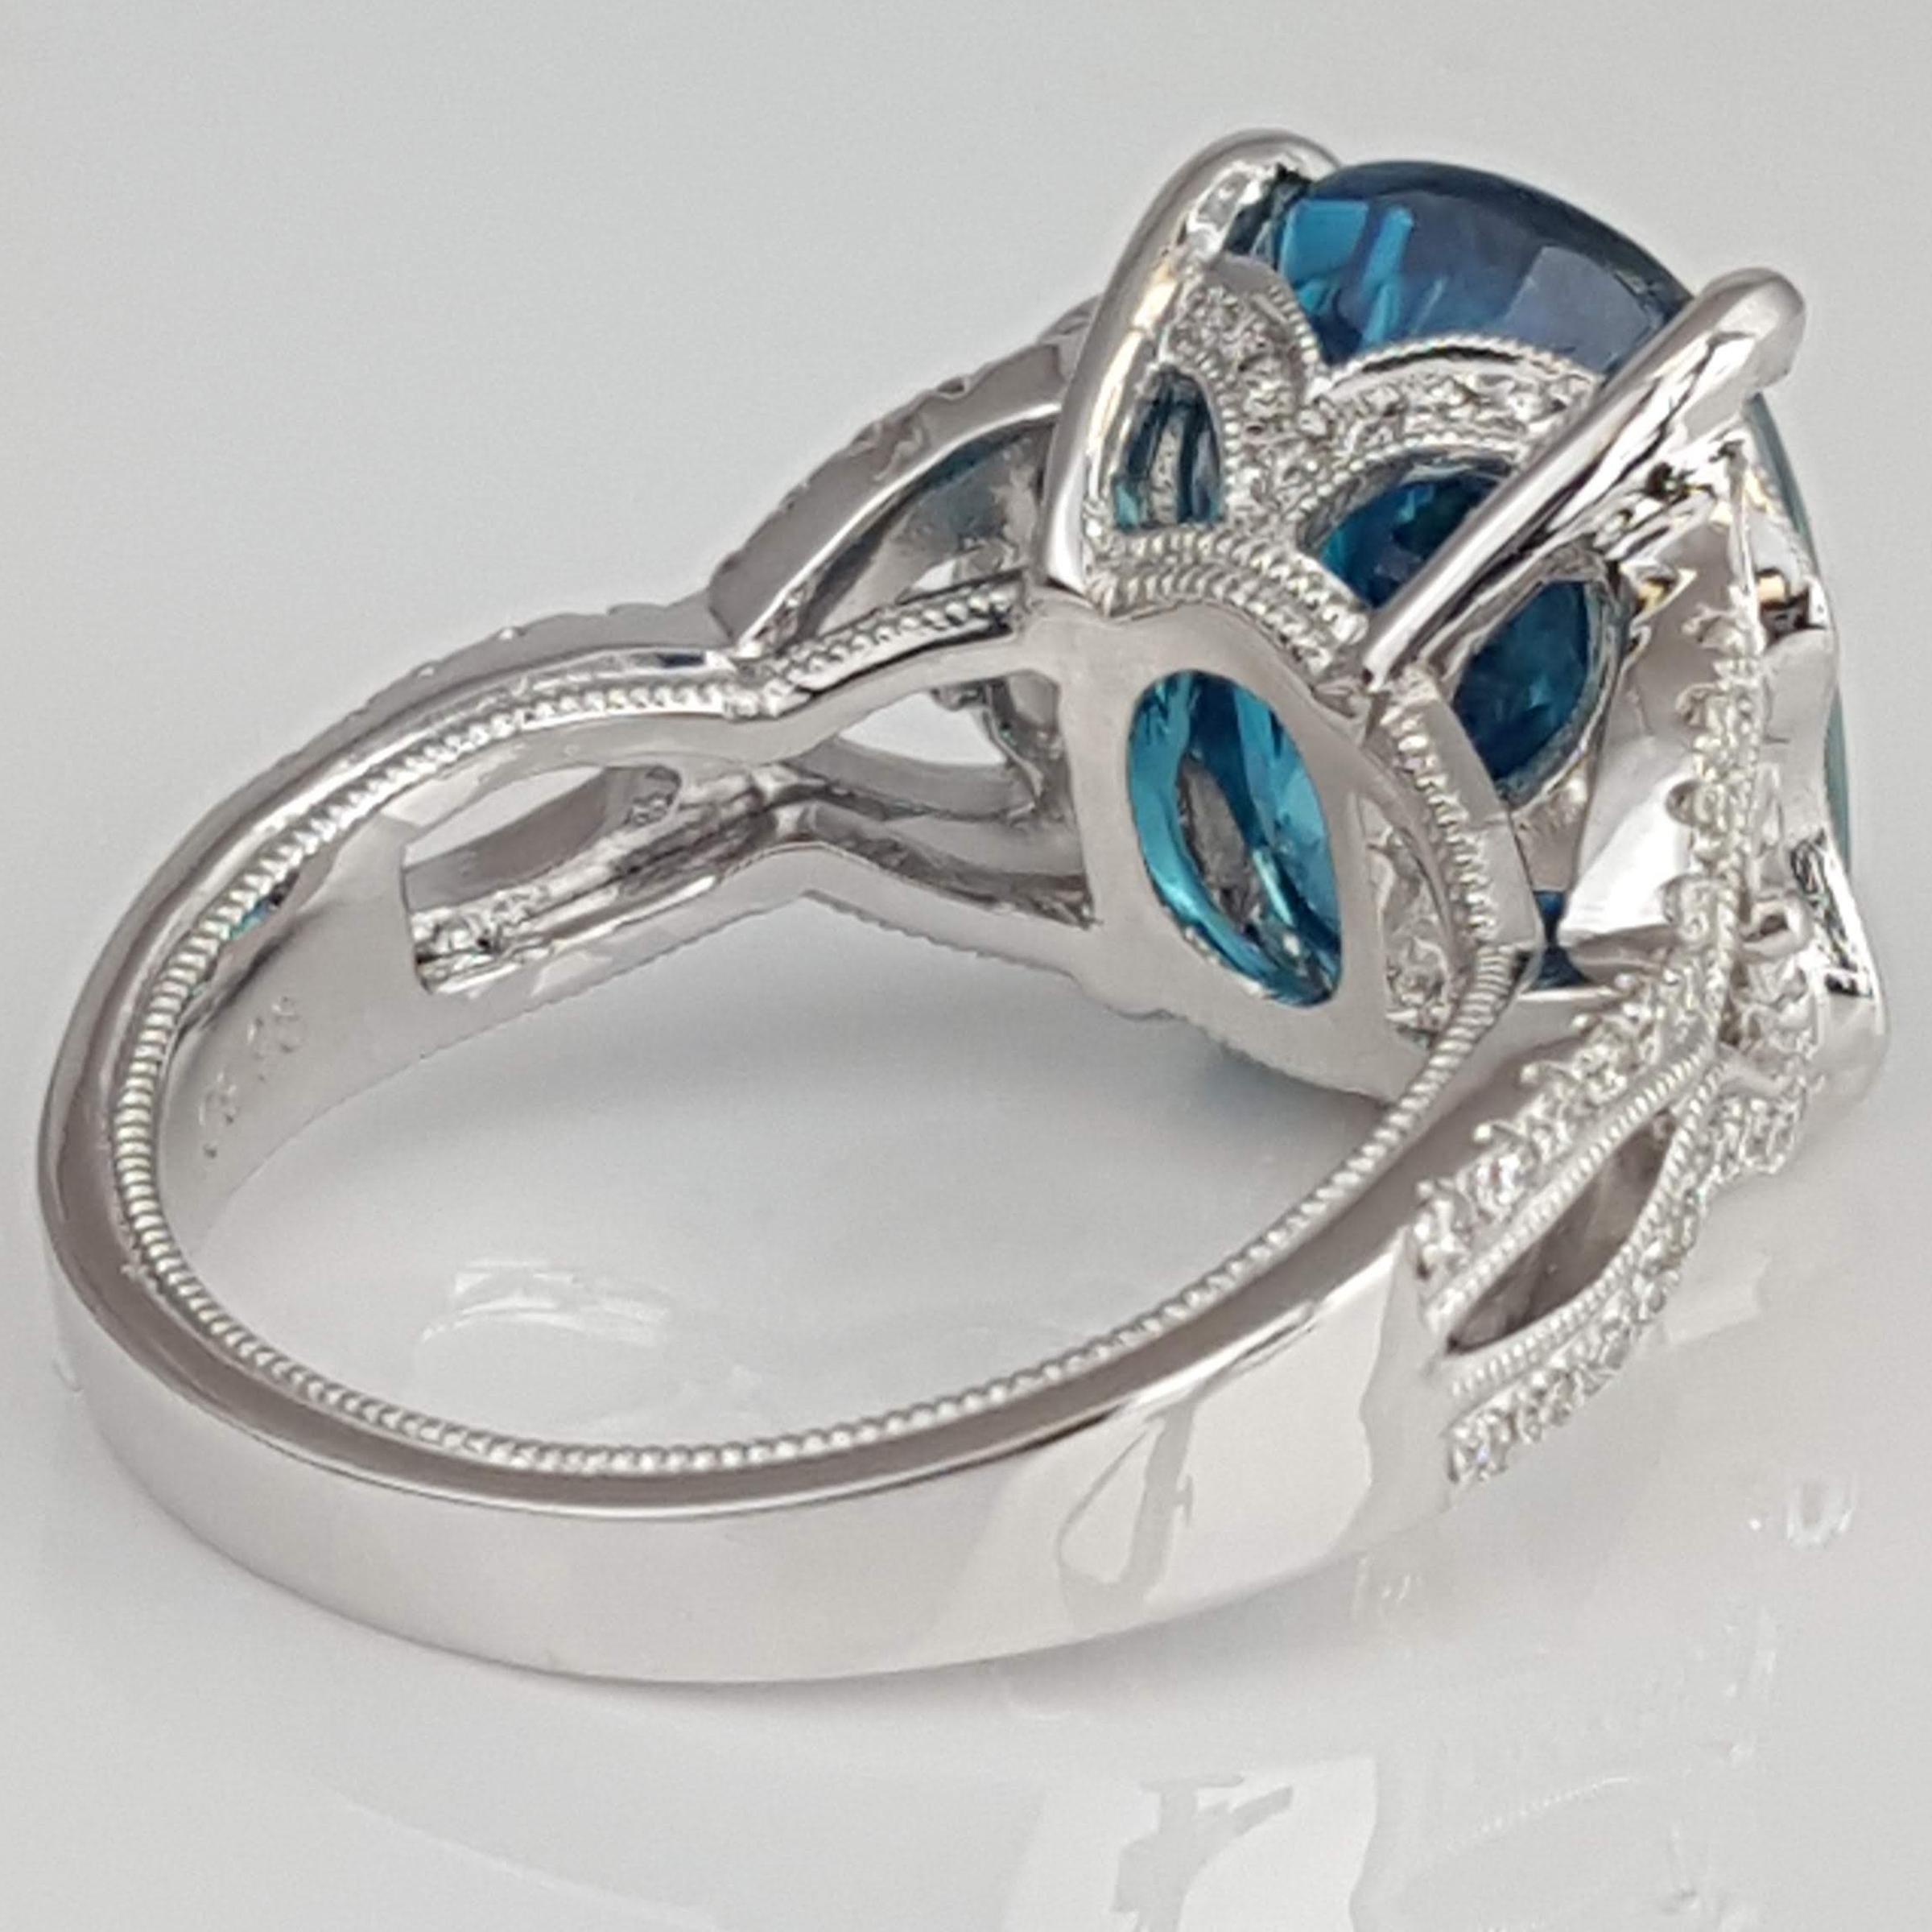 9.98 Ct Oval Cut Blue Zircon and 0.54 Carat Natural Diamond Ring in 18W ref1361 For Sale 1